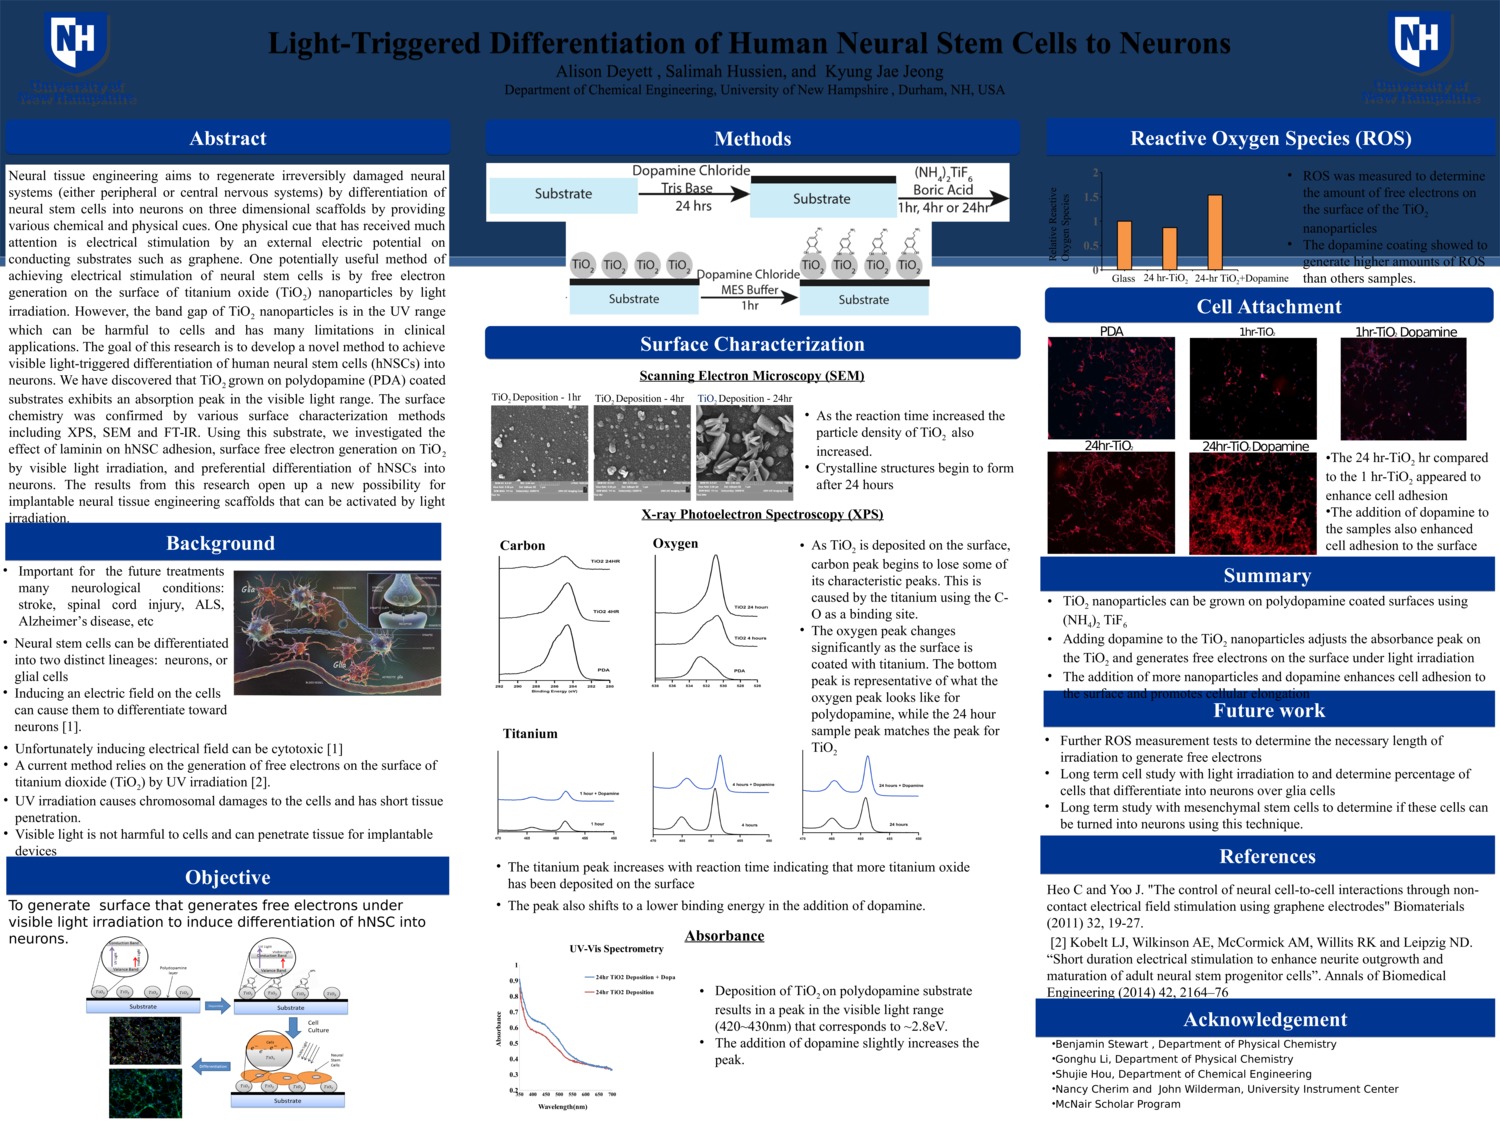 Light-Triggered Differentiation Of Human Neural Stem Cells To Neurons by aad11